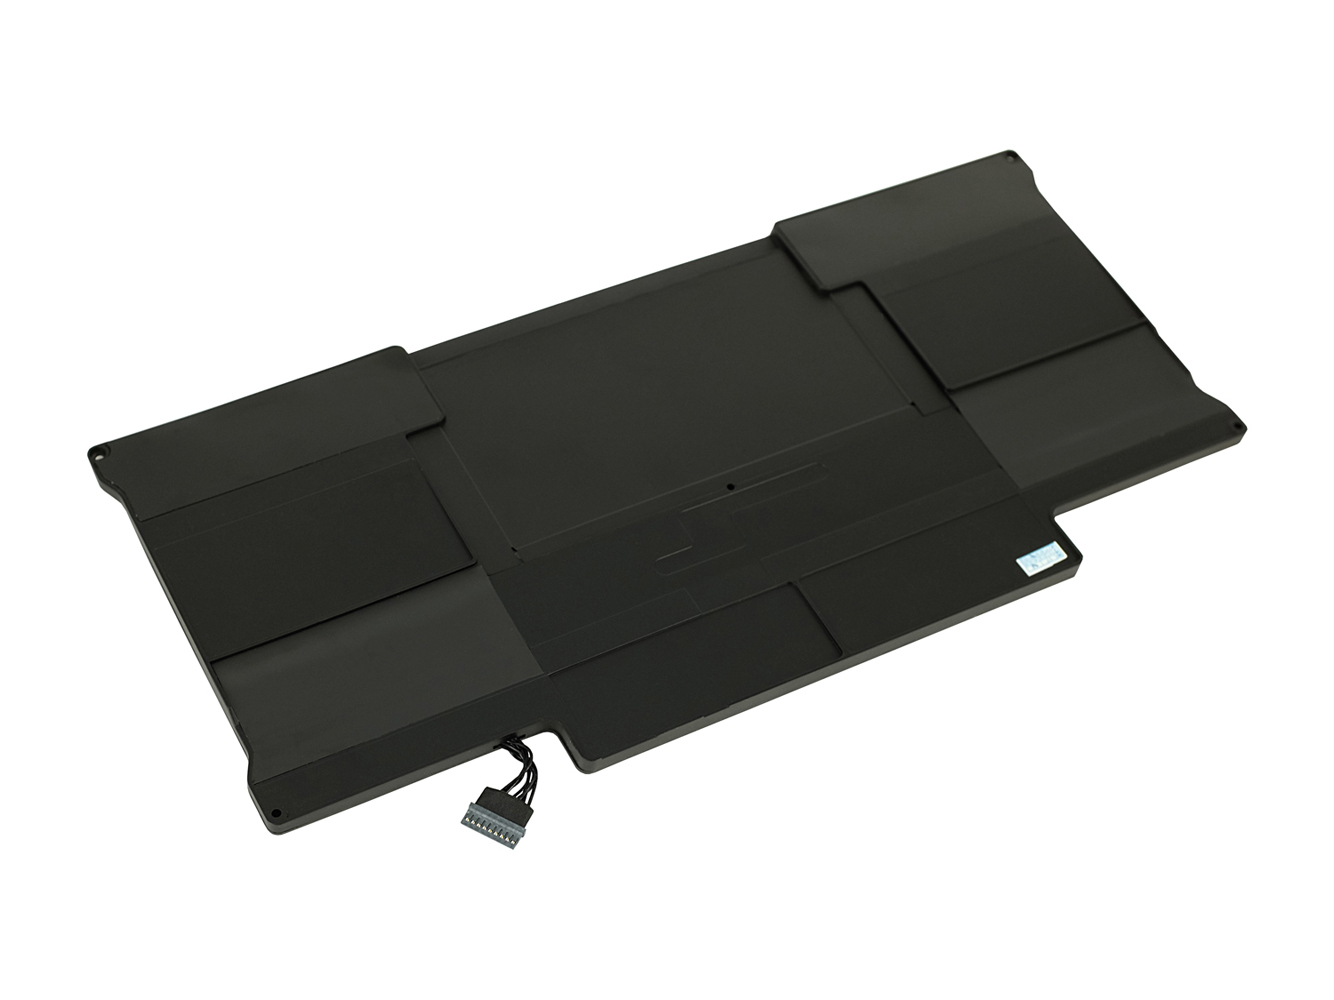  replacement Laptop Battery for Apple A1369 (2010 version)  Core i5  1.6, A1369 (Mid-2011 Version)  Core i7  1.8, 7.30V